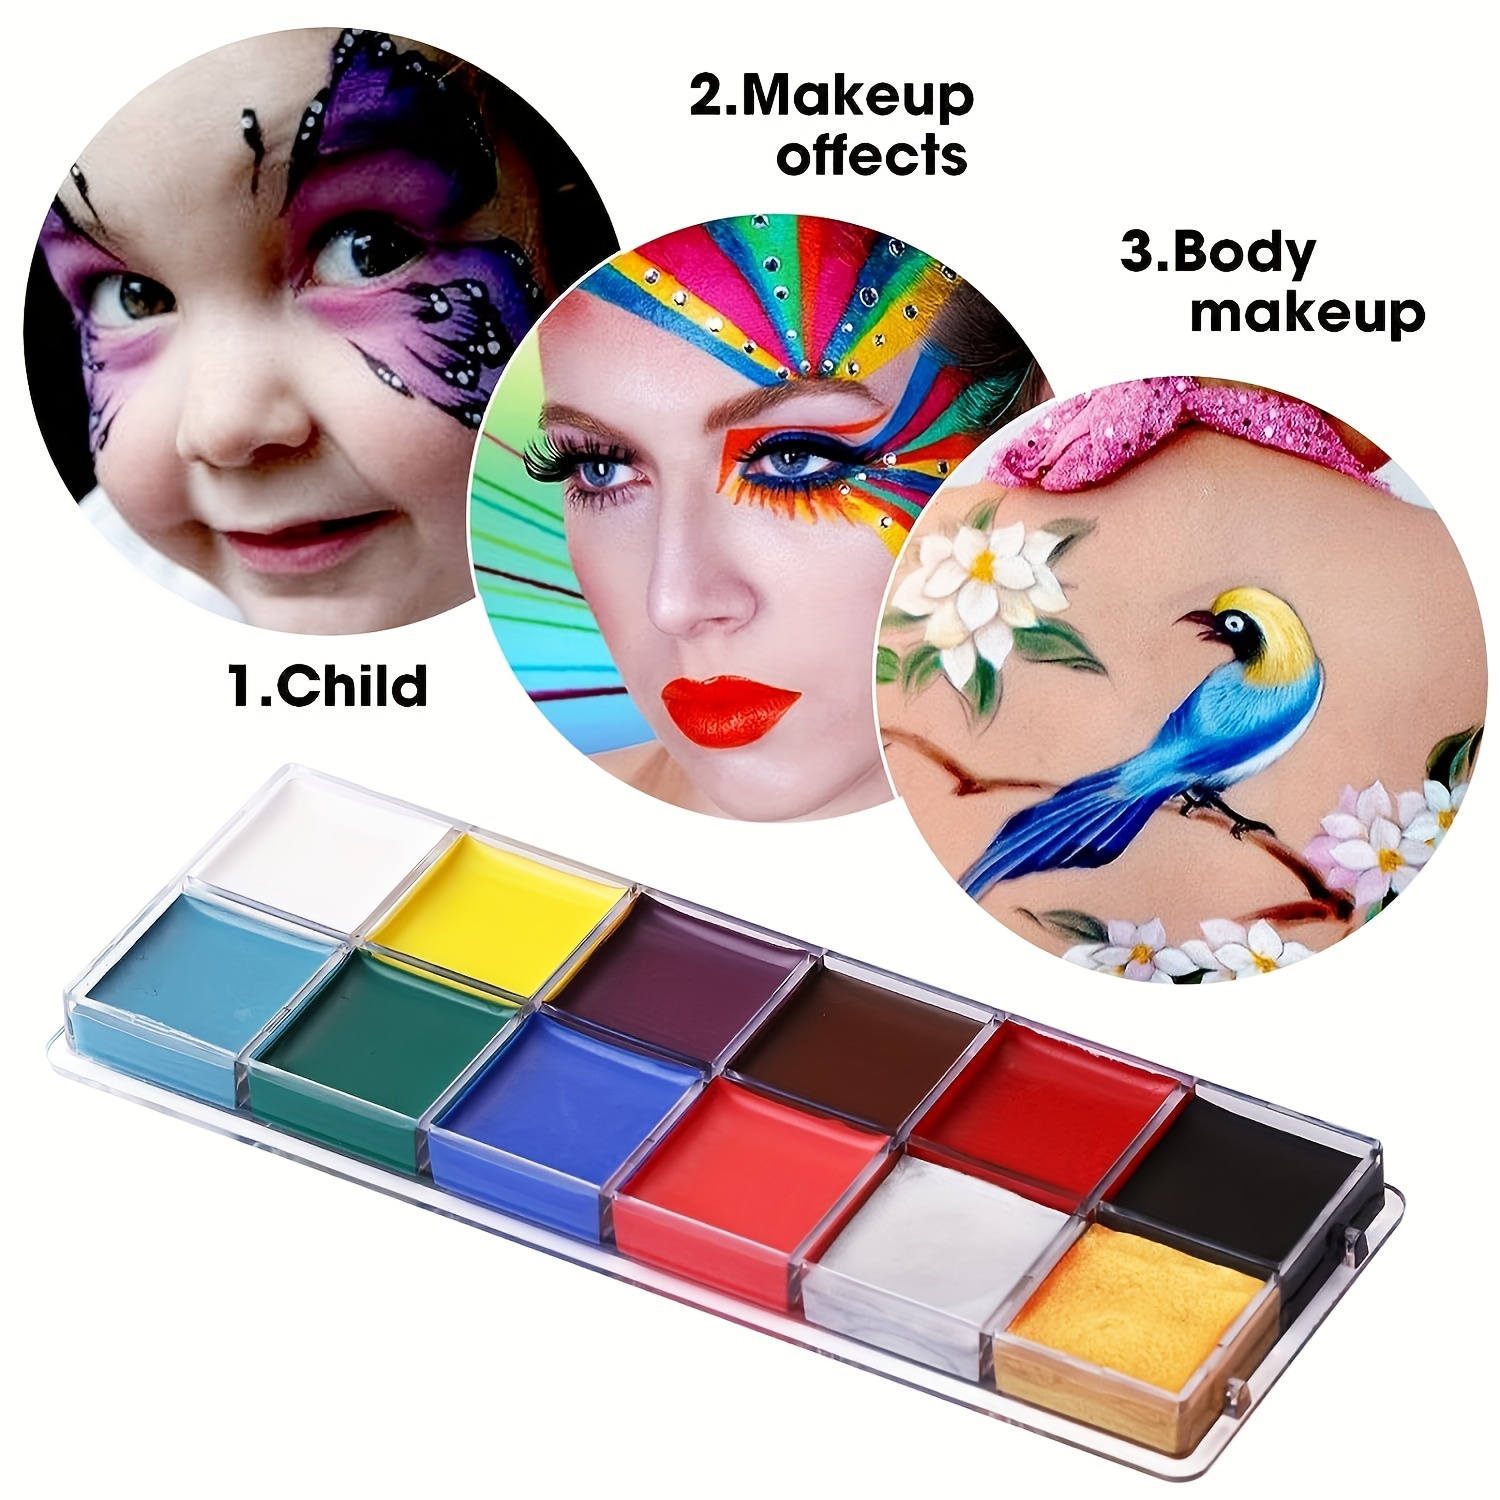 Athena Face Body Paint Oil Makeup Set, 12 Colors For Halloween Makeup Party  Artist Brushes, Tattoo Template Art Crafts Kit